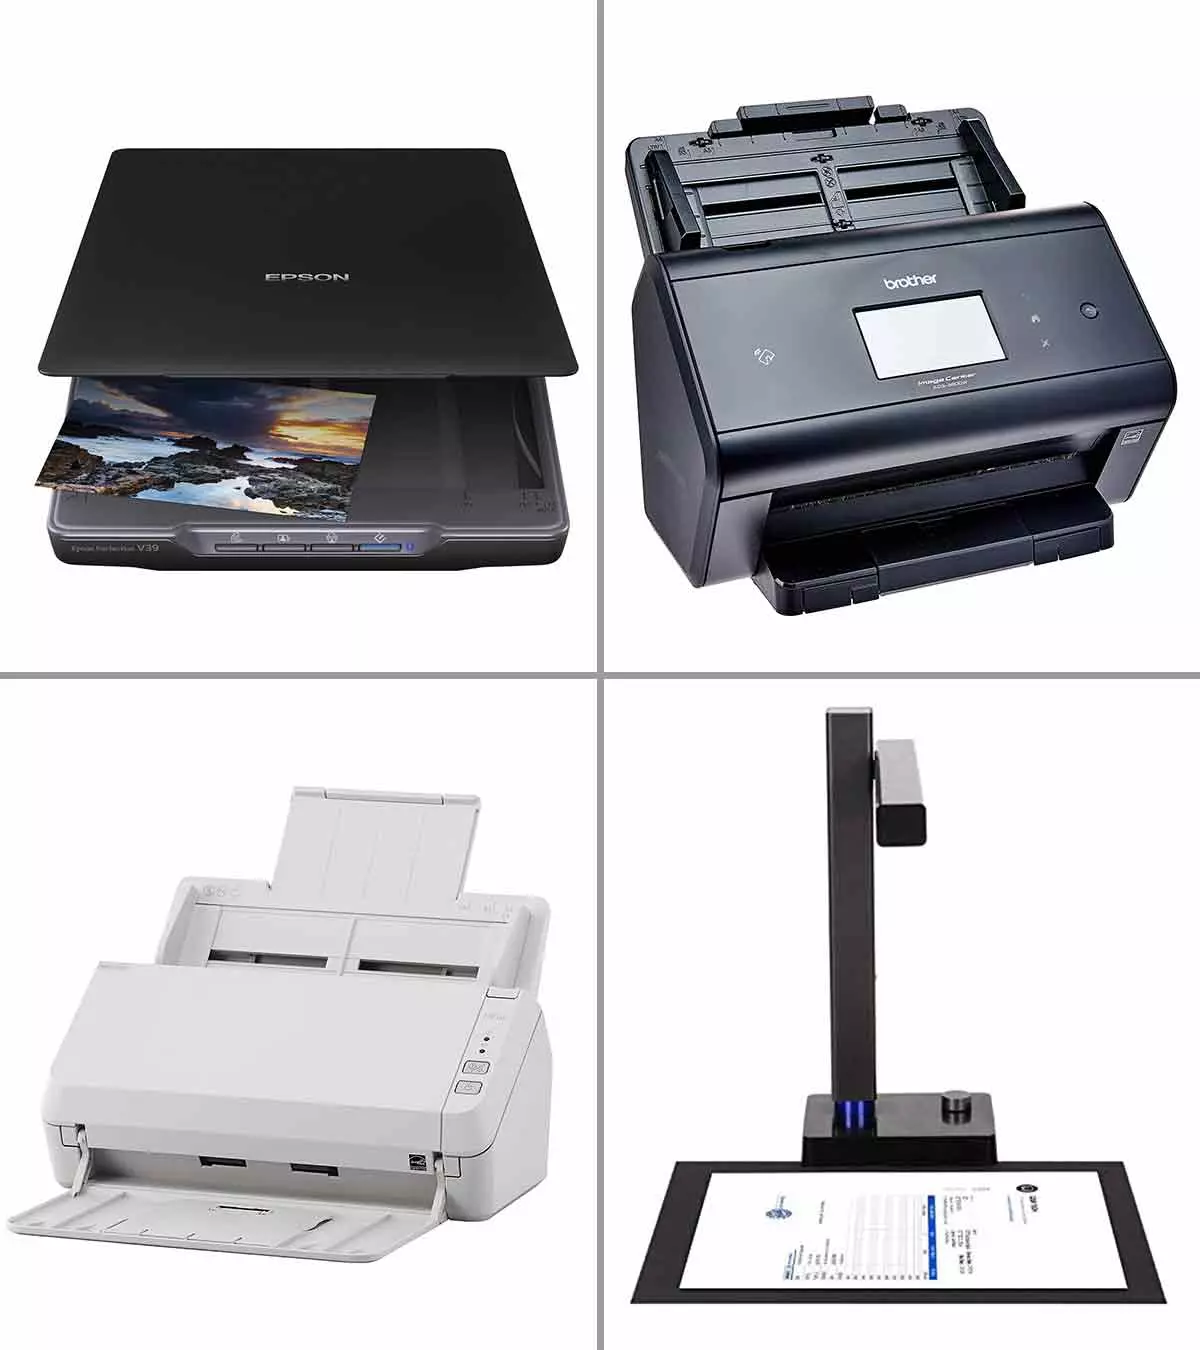 11 Best Scanners In India For Office & Home Use In 2021